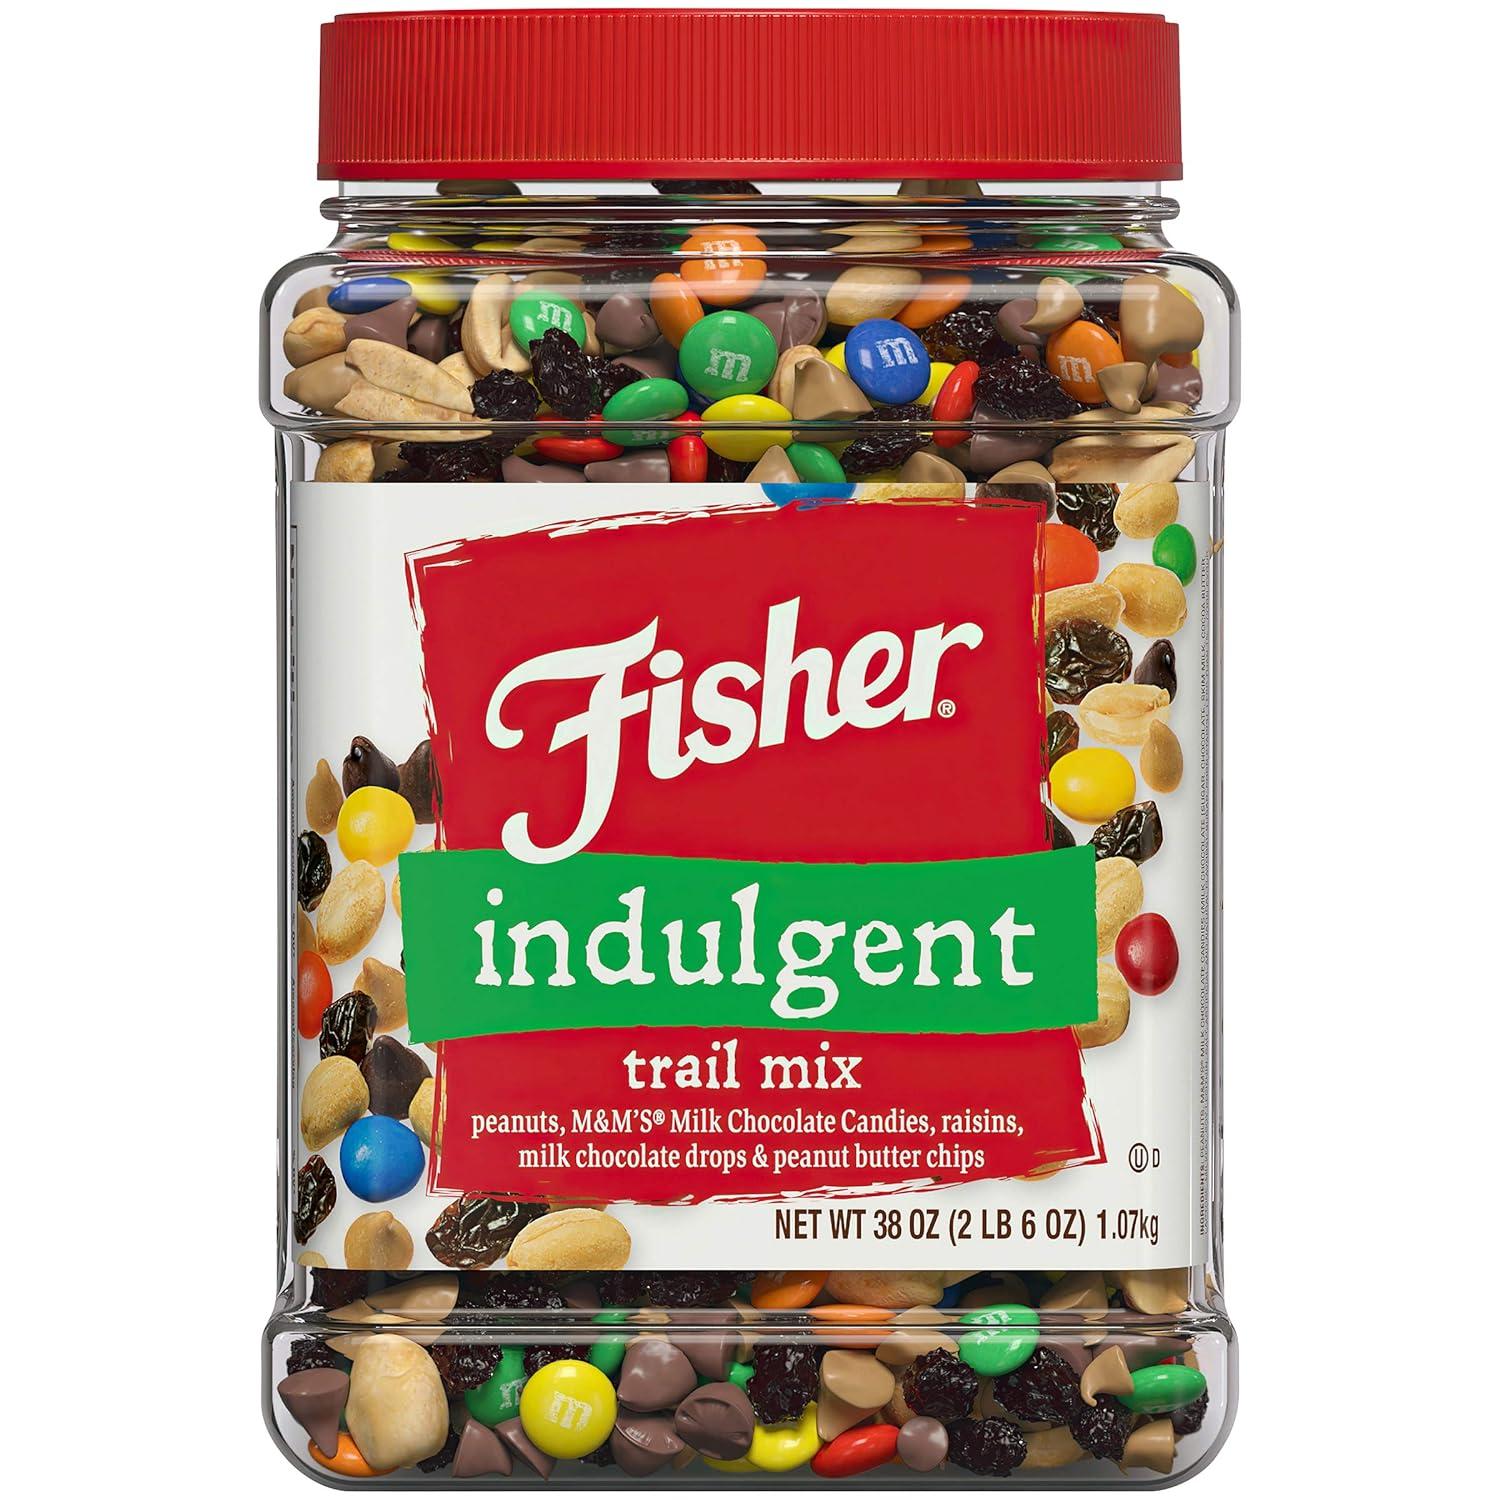 Fisher Snack Indulgent Trail Mix for $10.49